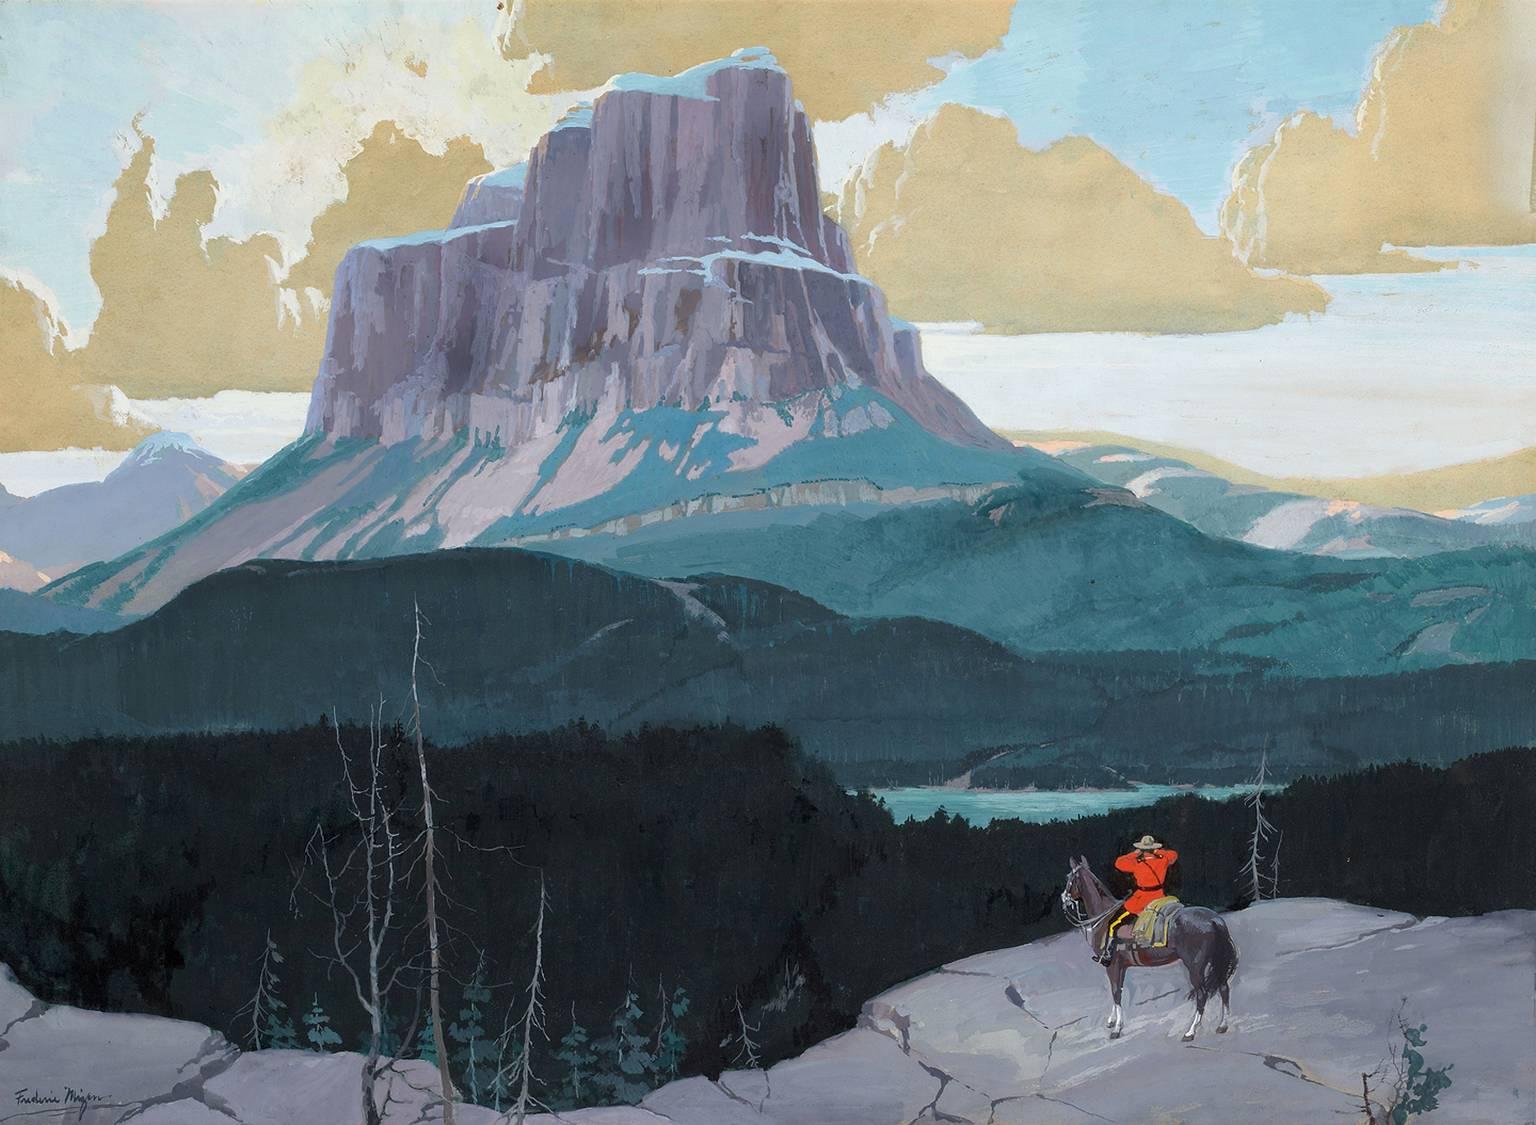 Landscape Painting FREDERIC KIMBALL MIZEN - Gazing at Butte, CanadianMountie